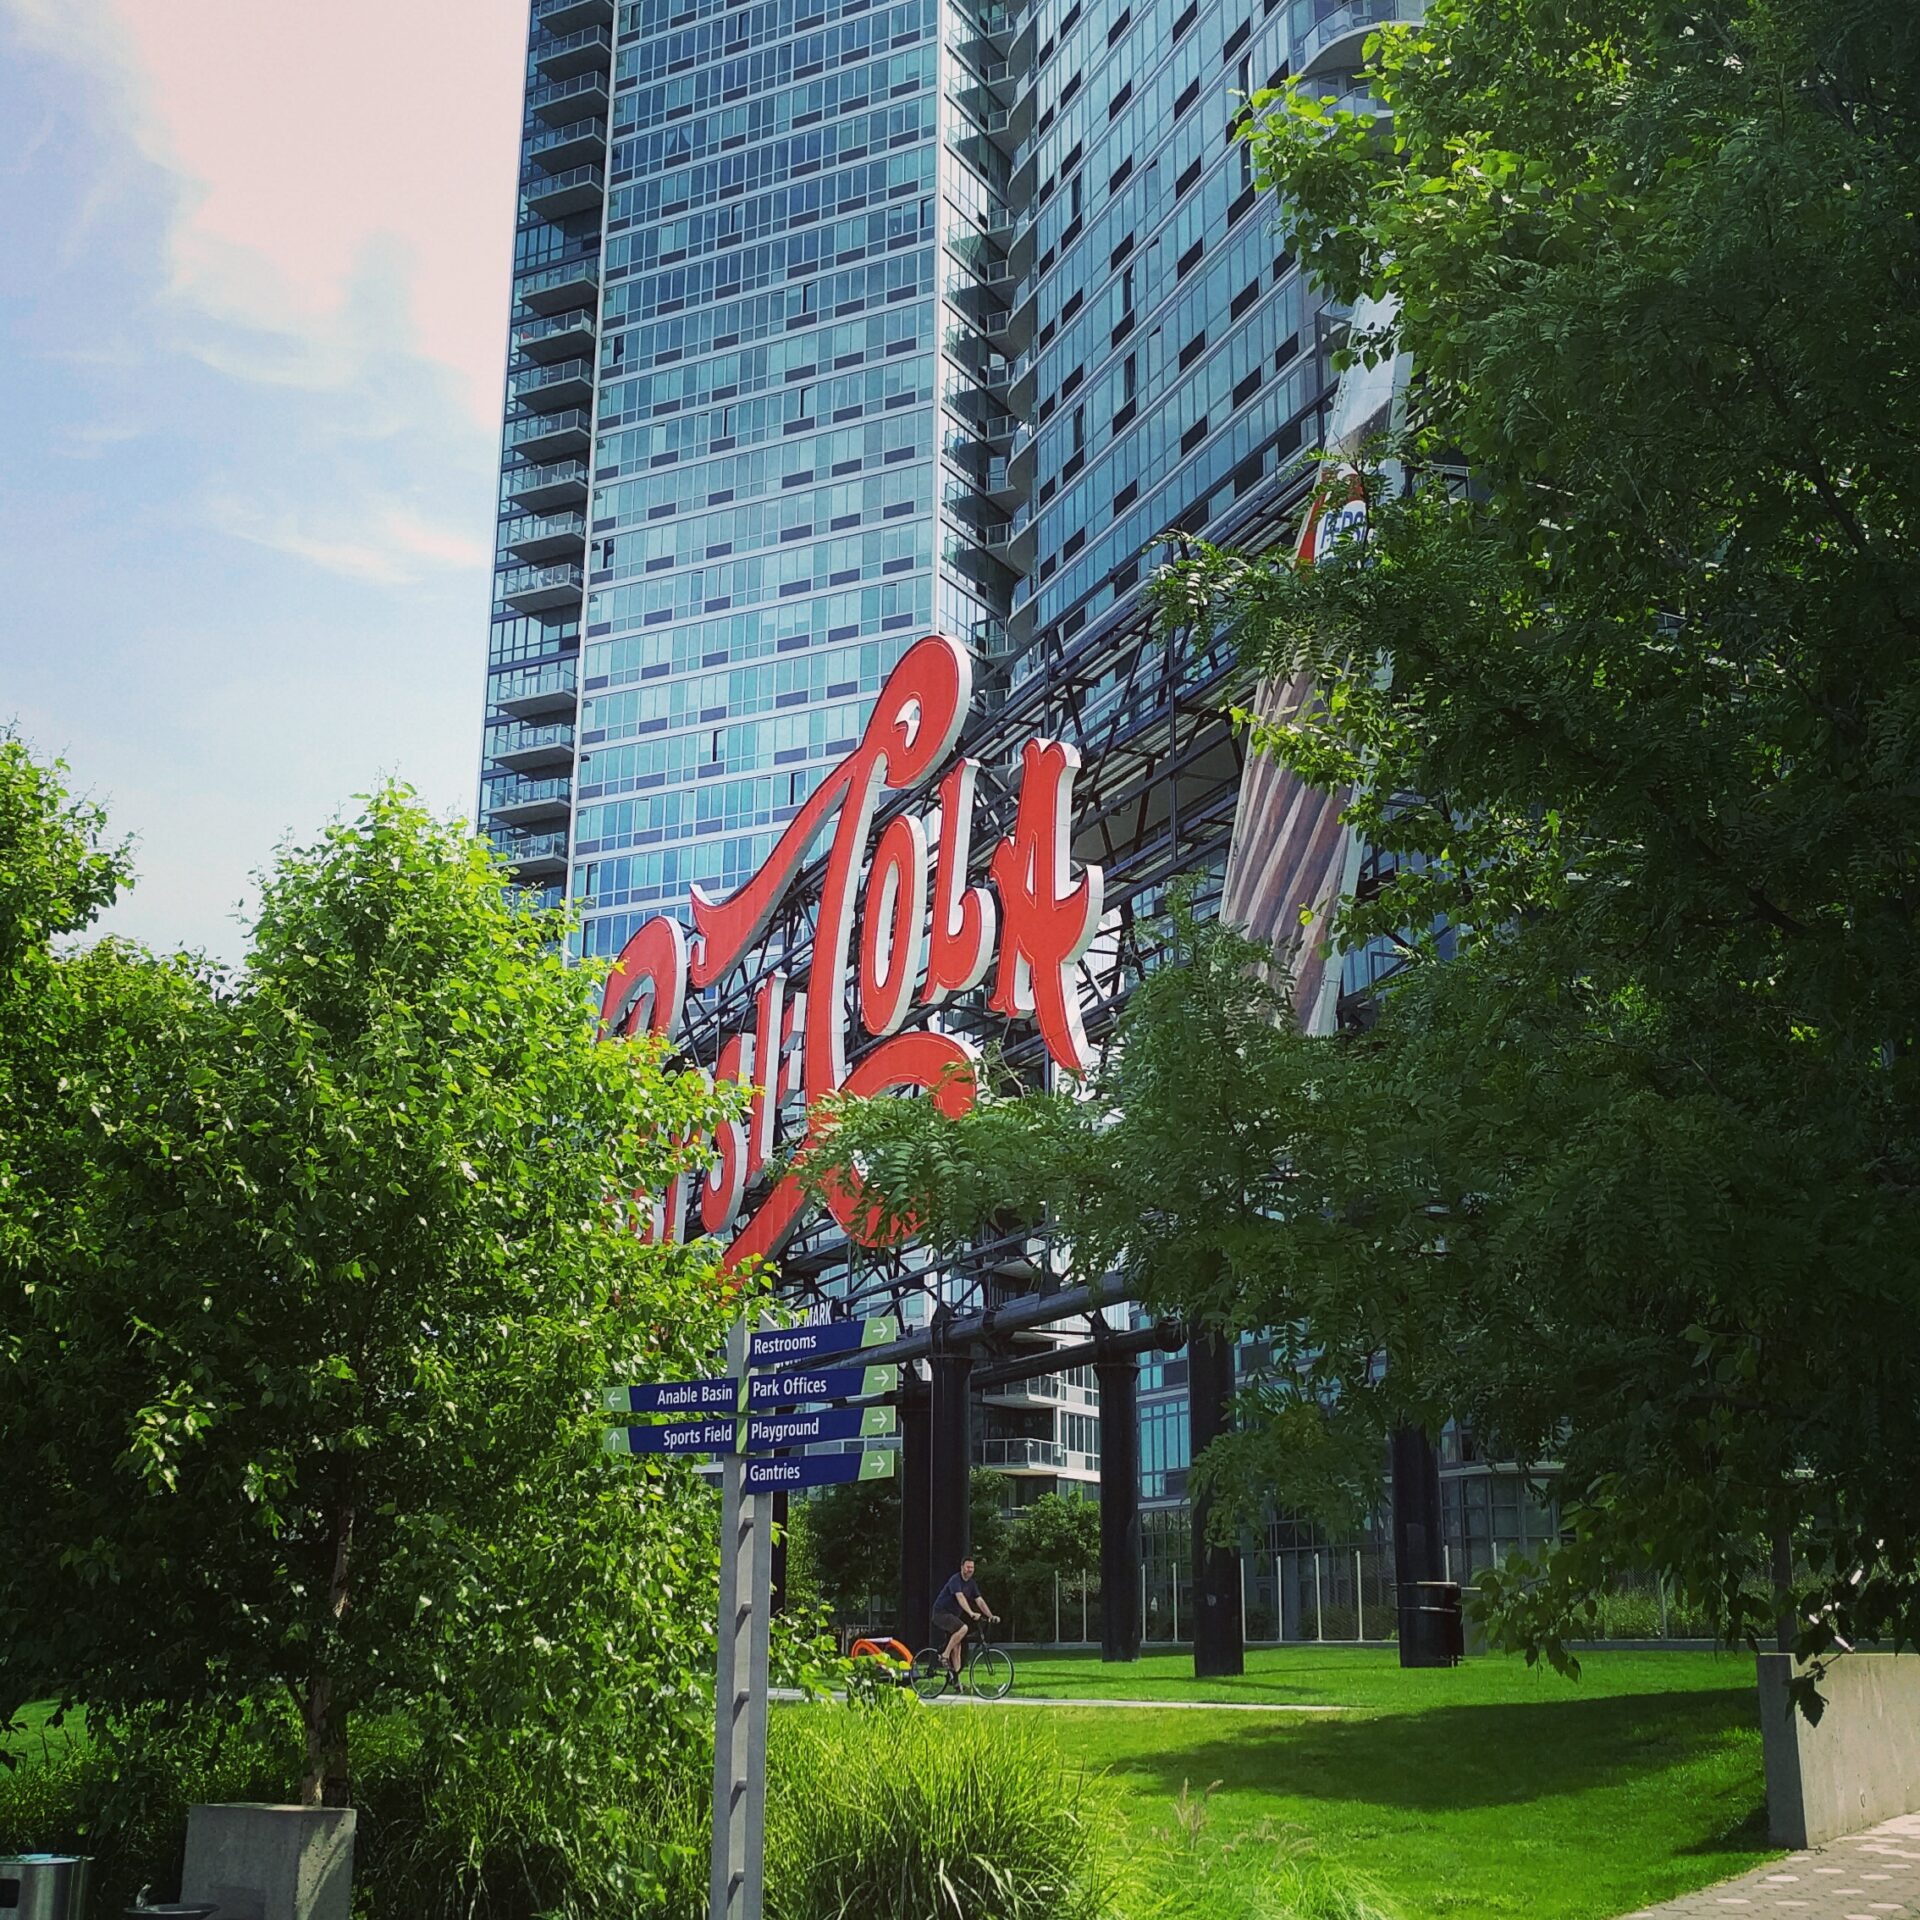 pepsi cola sign behind the trees